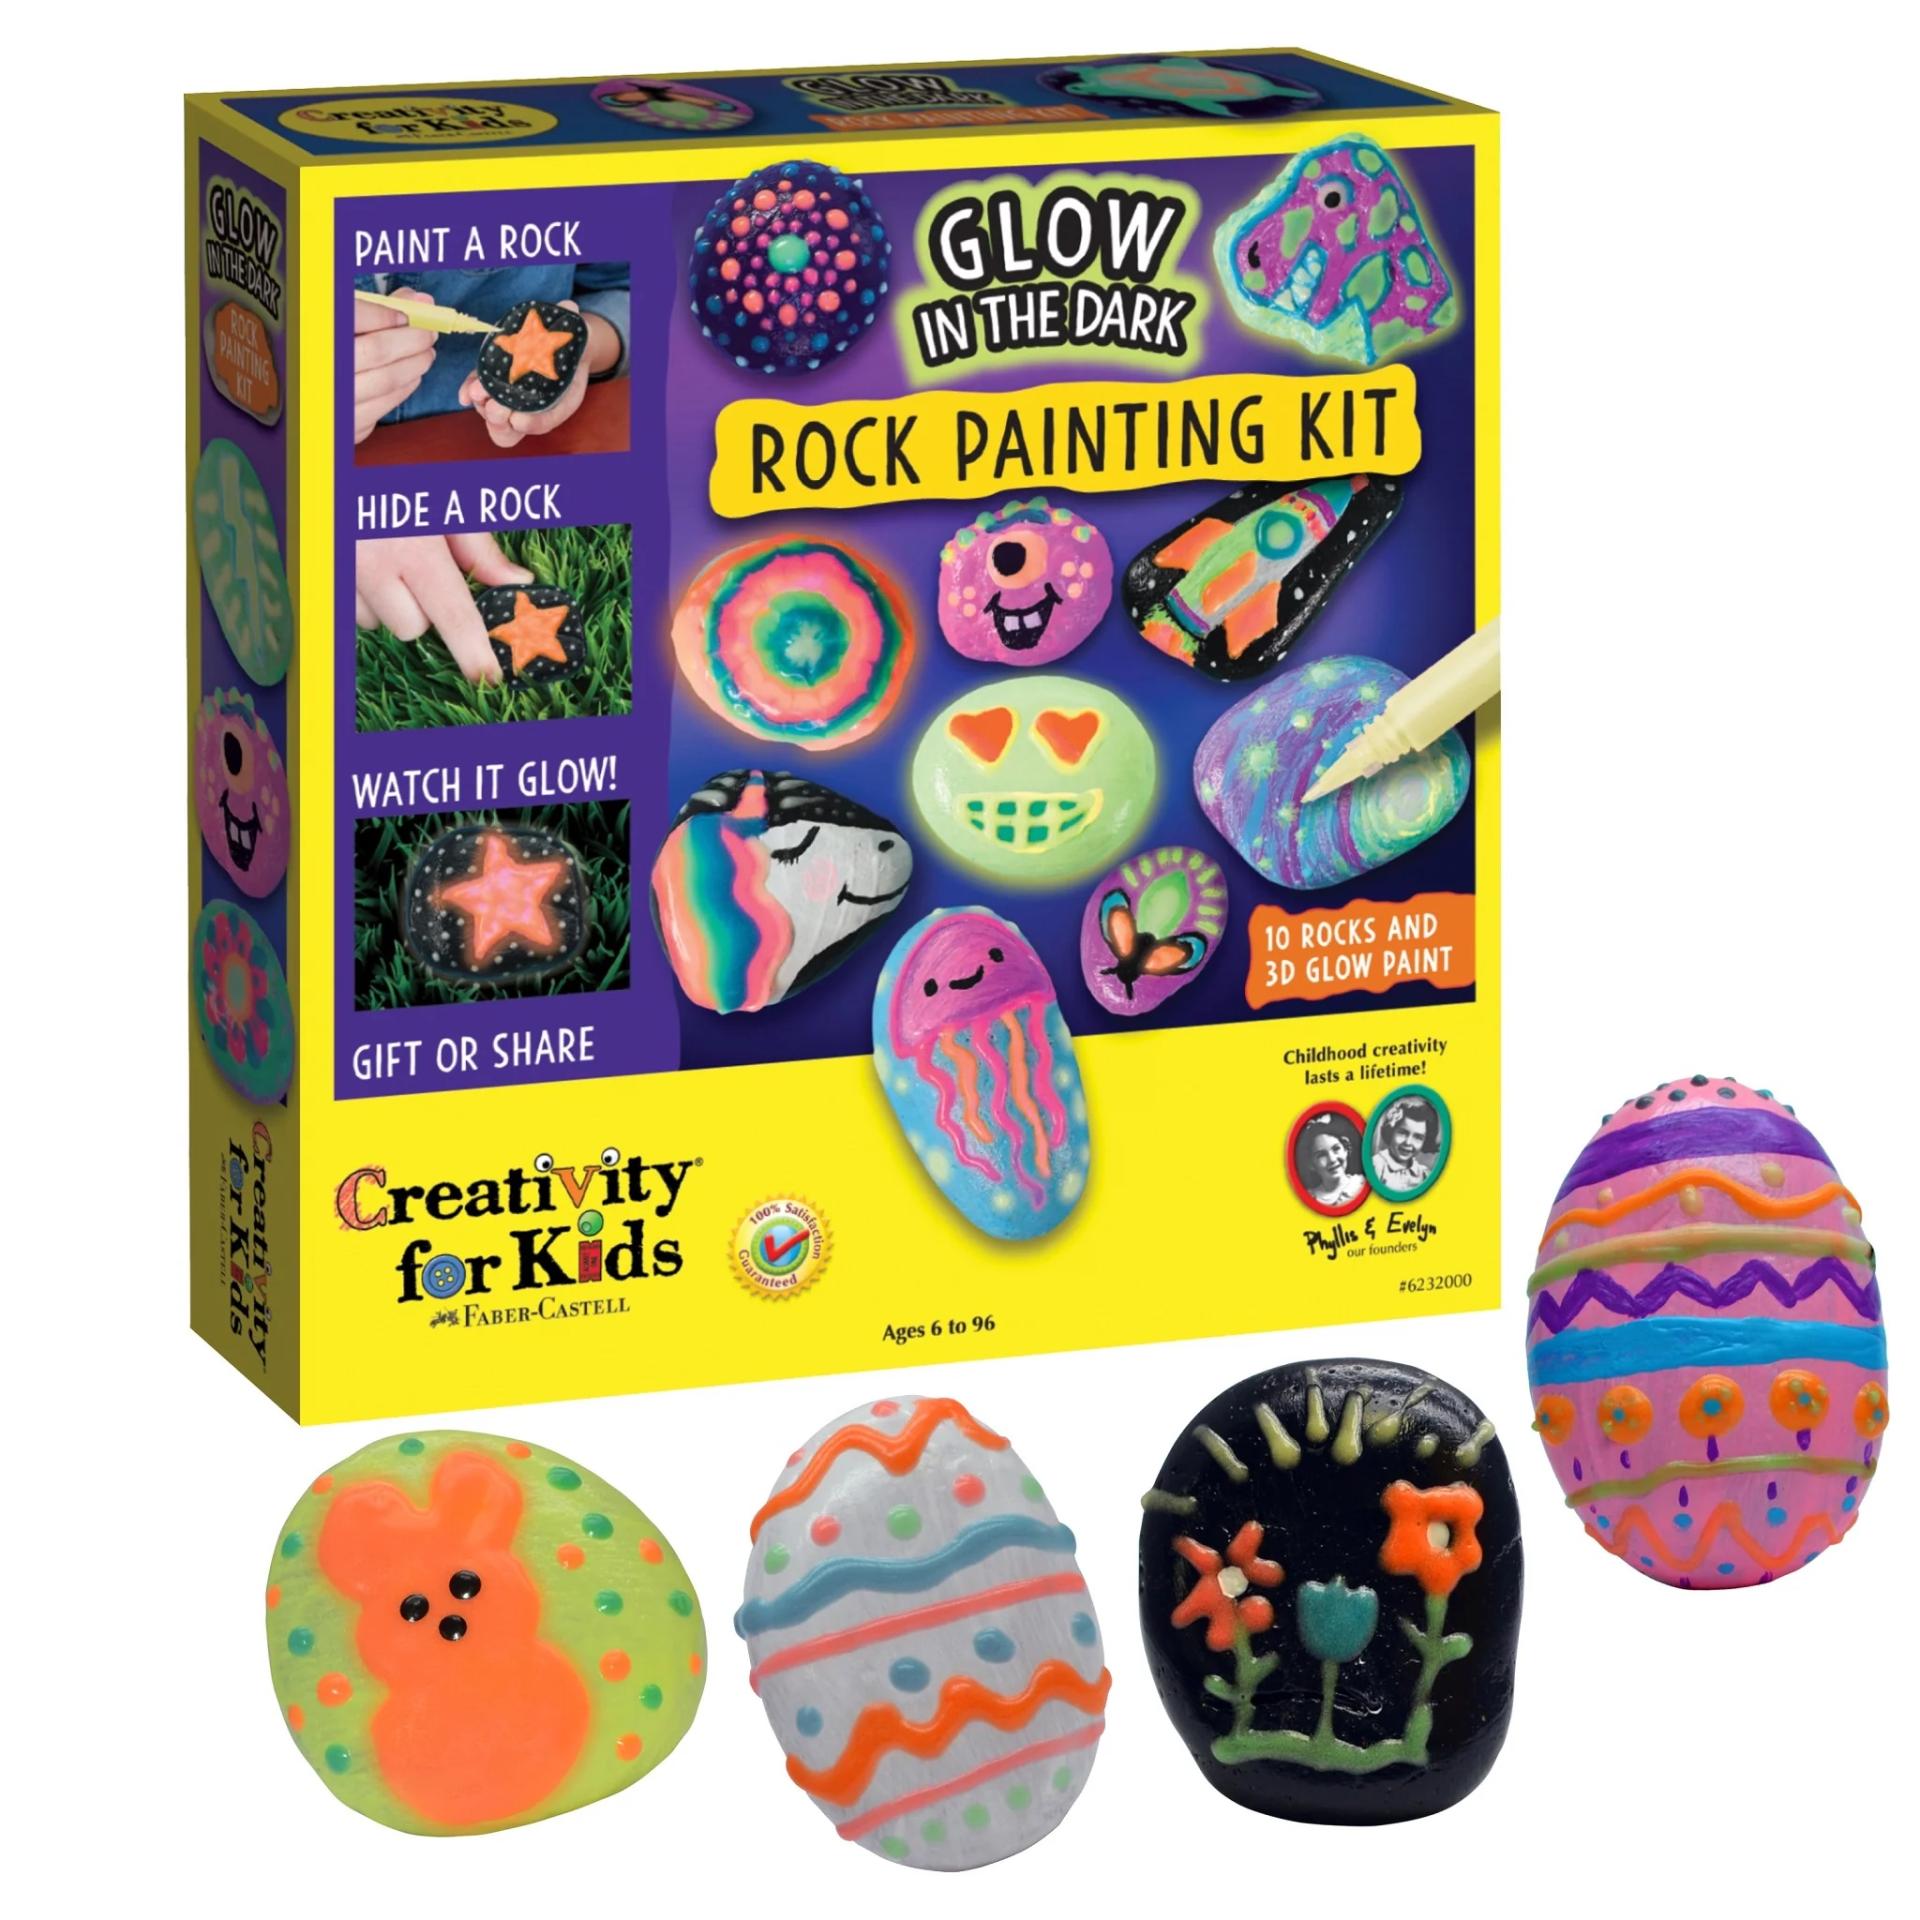 12 Halloween Rock Painting Kit for Kids, Glow in The Dark Rock Painting with 12